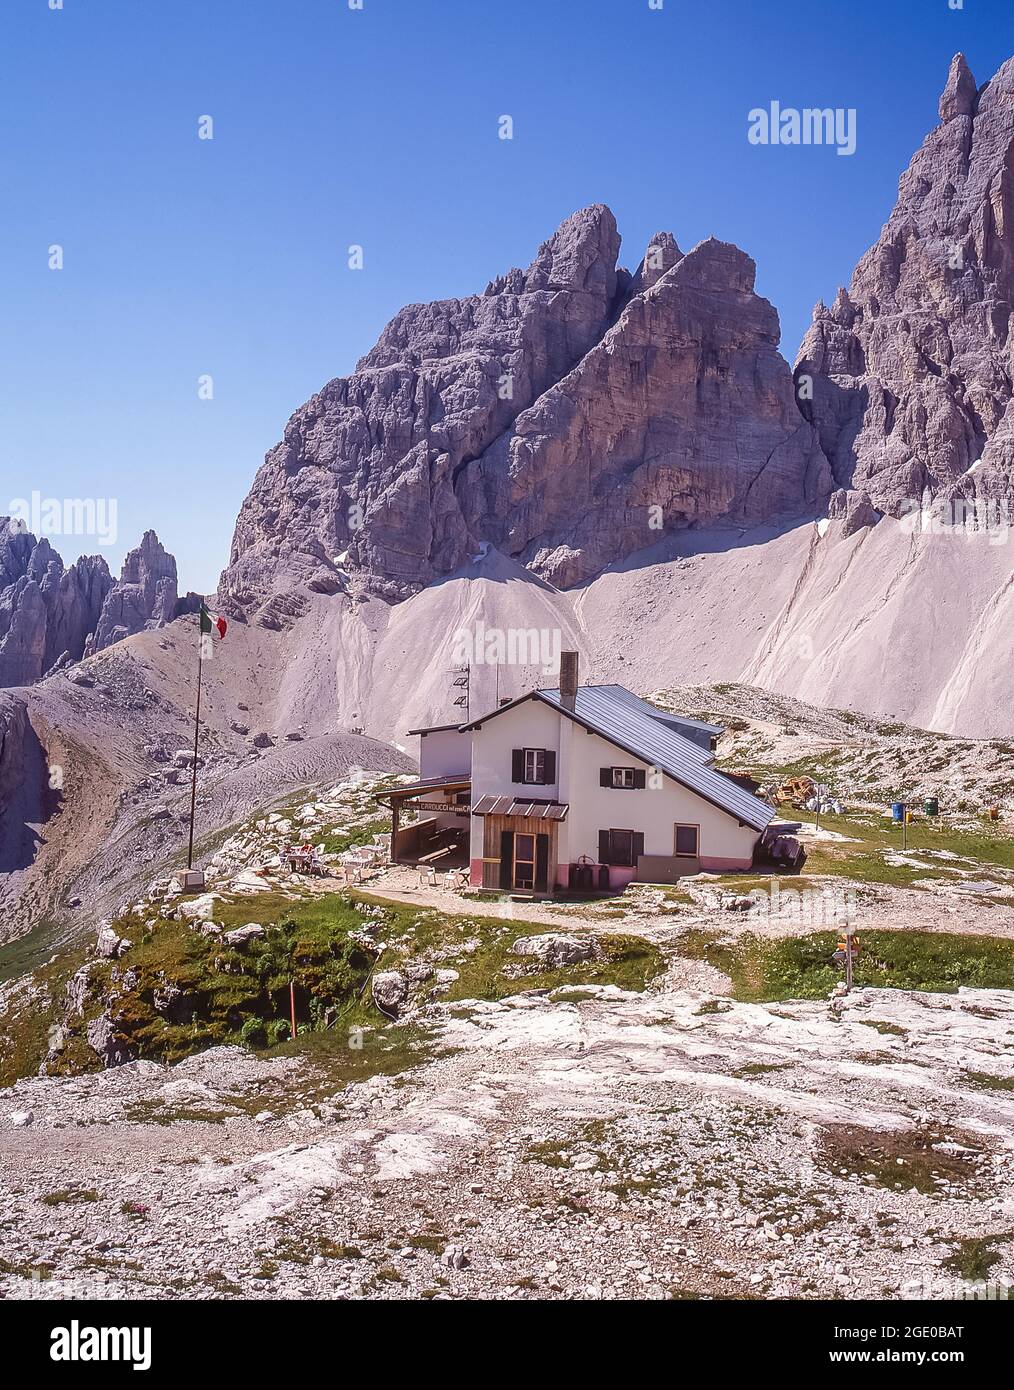 This is the Italian Alpine Club CAI owned Rifugio Carducci mountain refuge close-by the formidable peak of the Zwolferkogel in the Sexton-Sesto Dolomites region of the Italian Dolomites, the Alto Adige of the Sud Tyrol Stock Photo